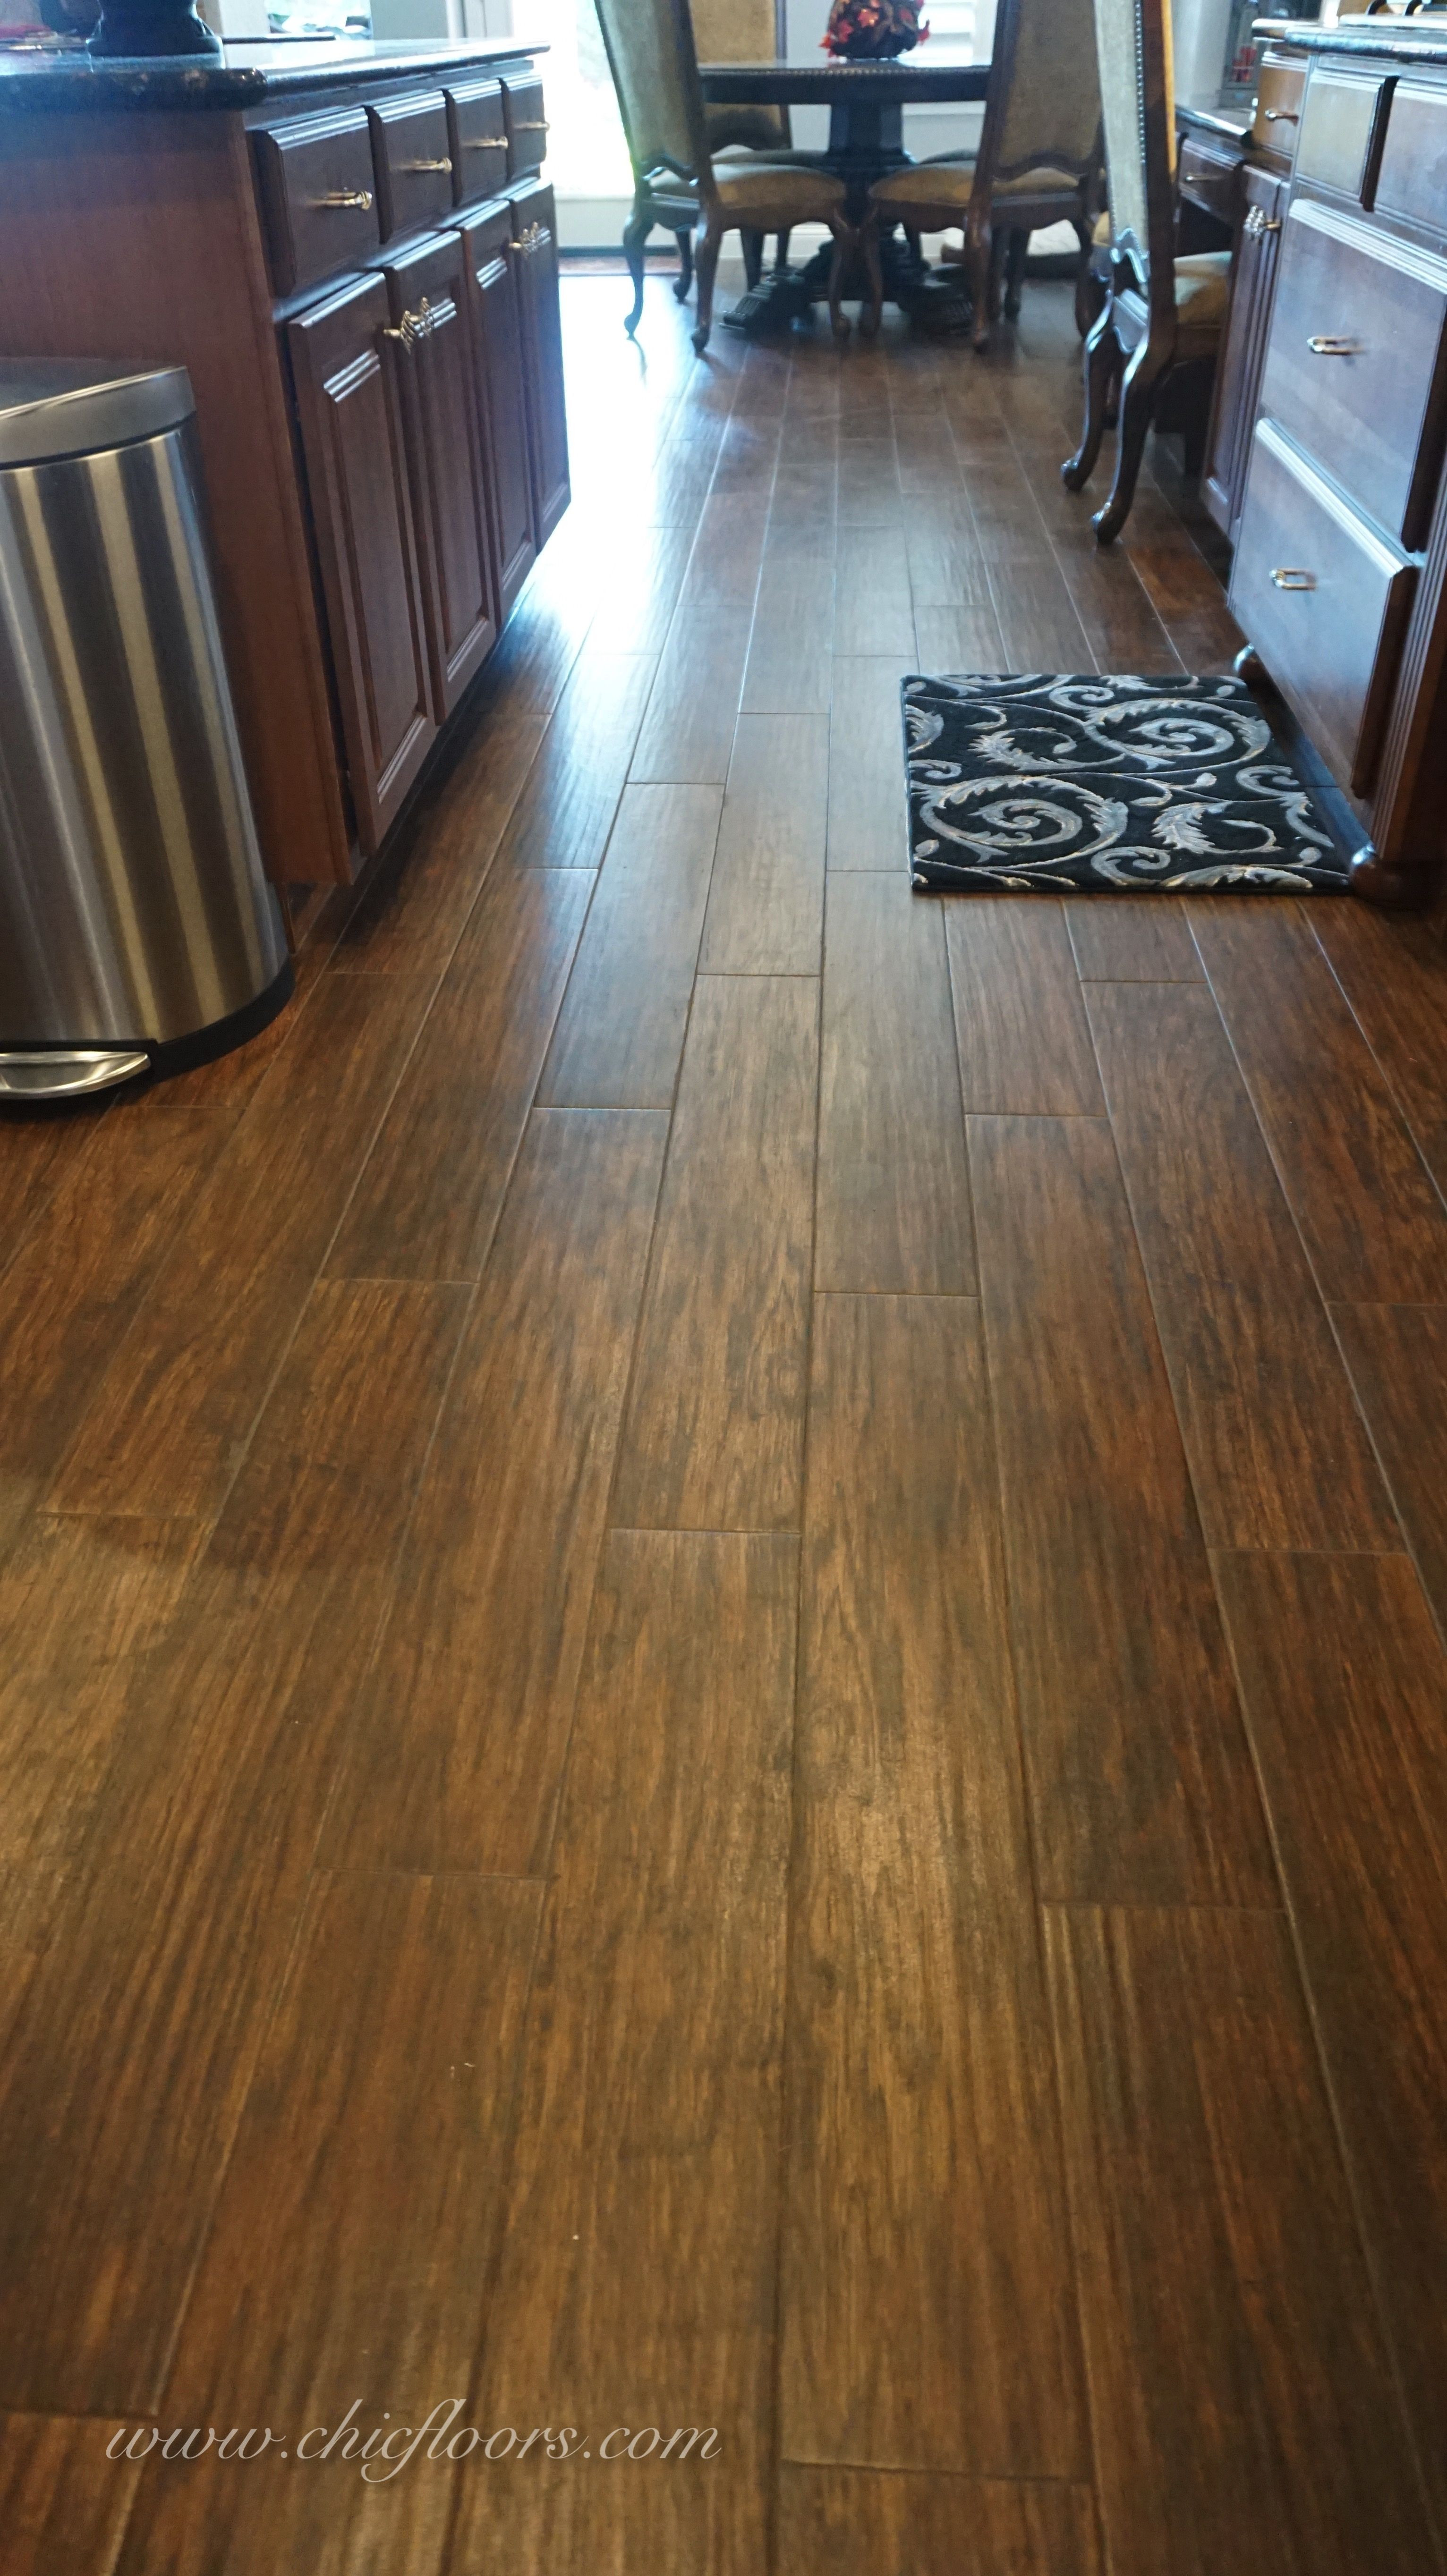 cleaning shaw engineered hardwood floors of shaw floors petrified hickory 6x36 porcelain tile in the color 700 regarding shaw floors petrified hickory 6x36 porcelain tile in the color 700 fossil